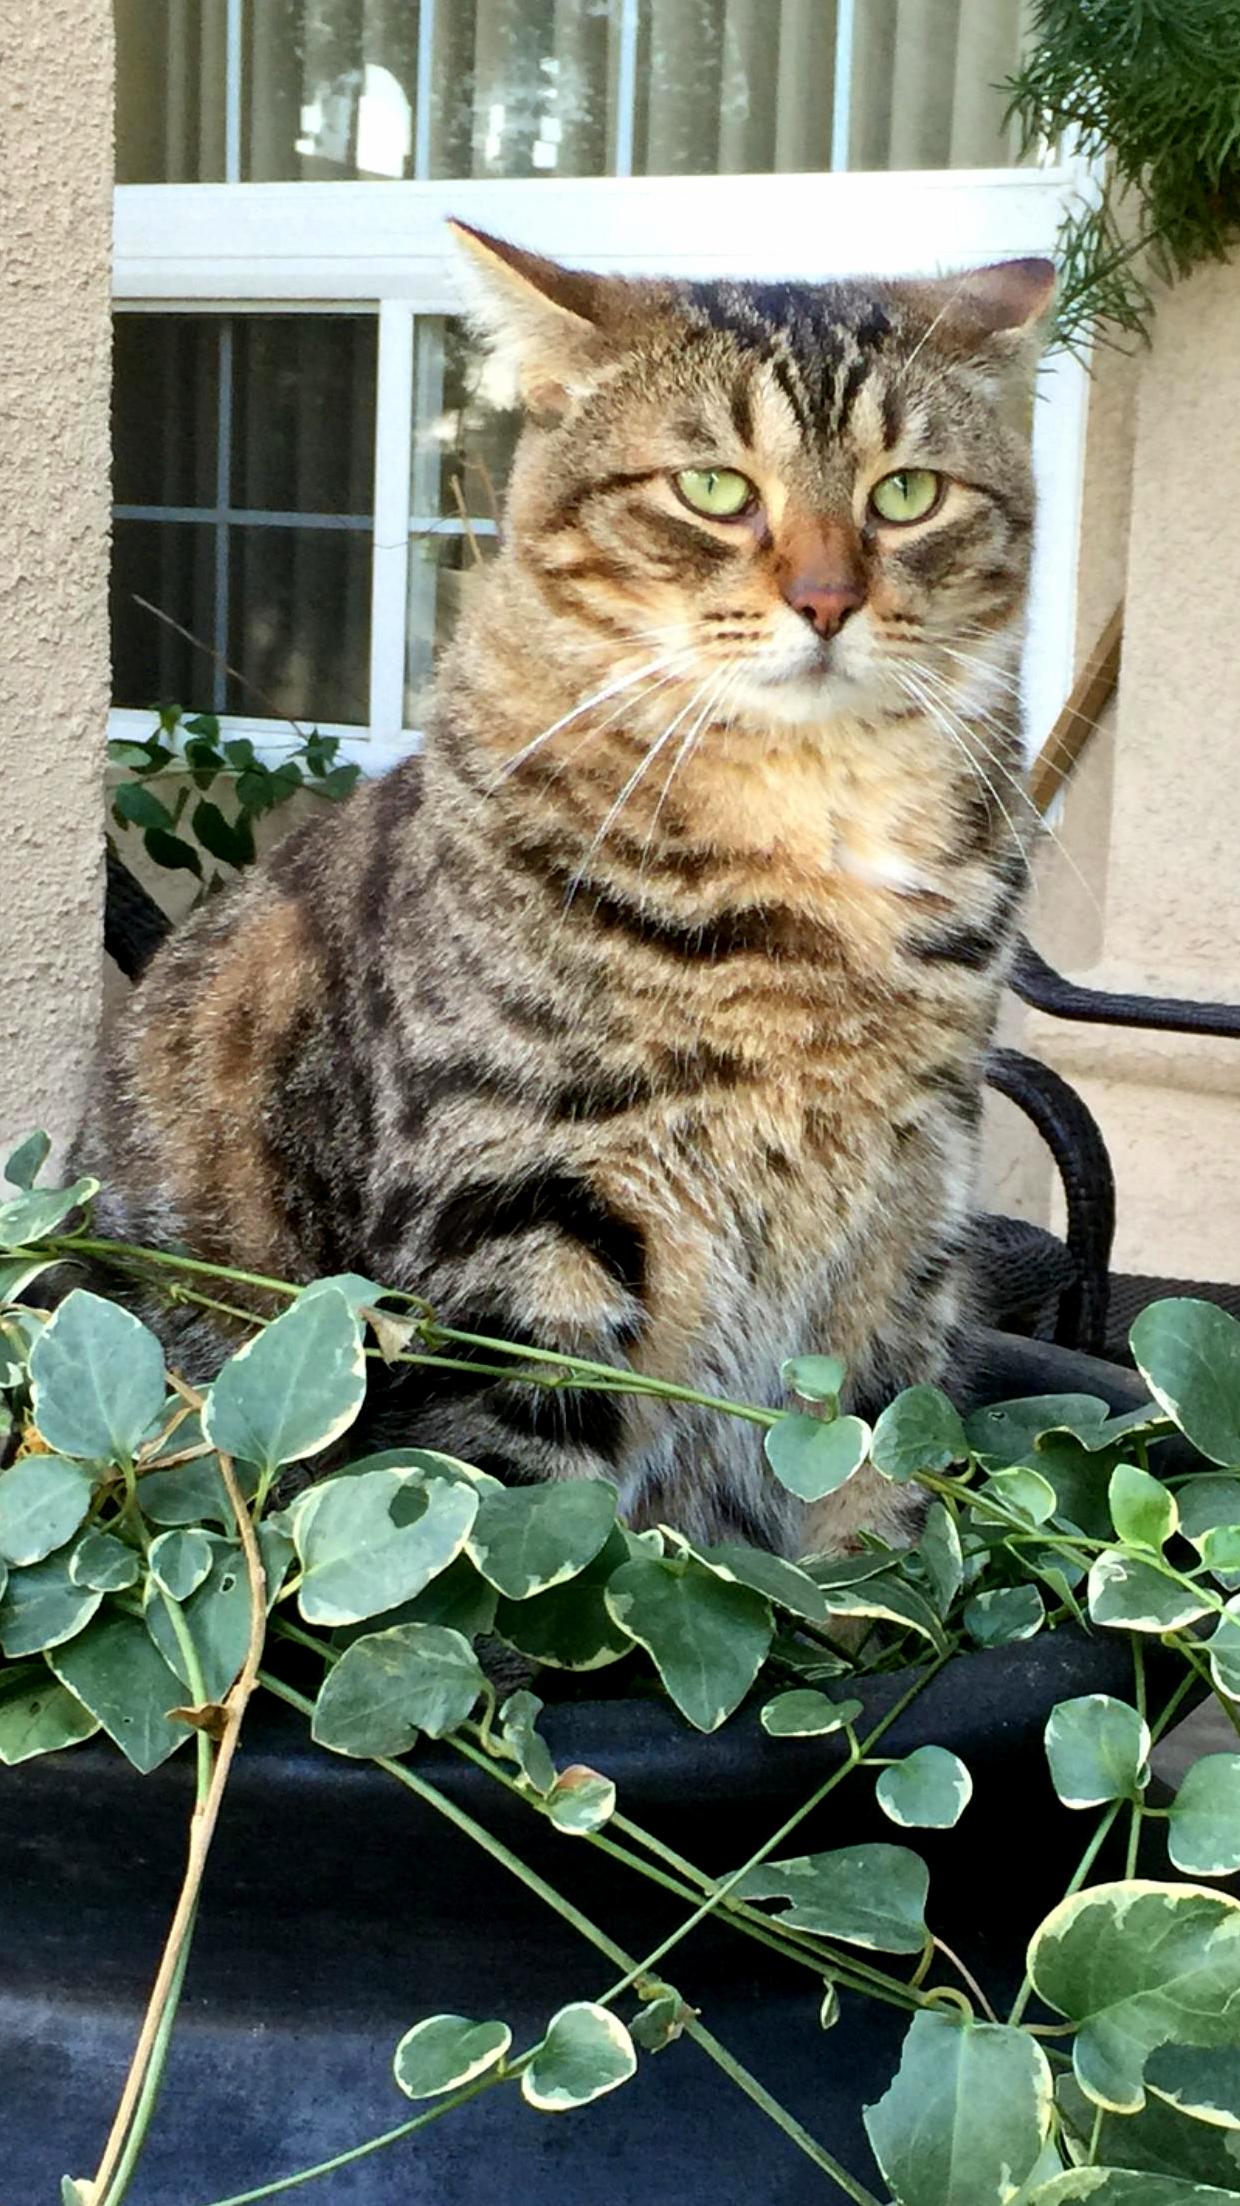 My cat surveying his kingdom from a potted plant.